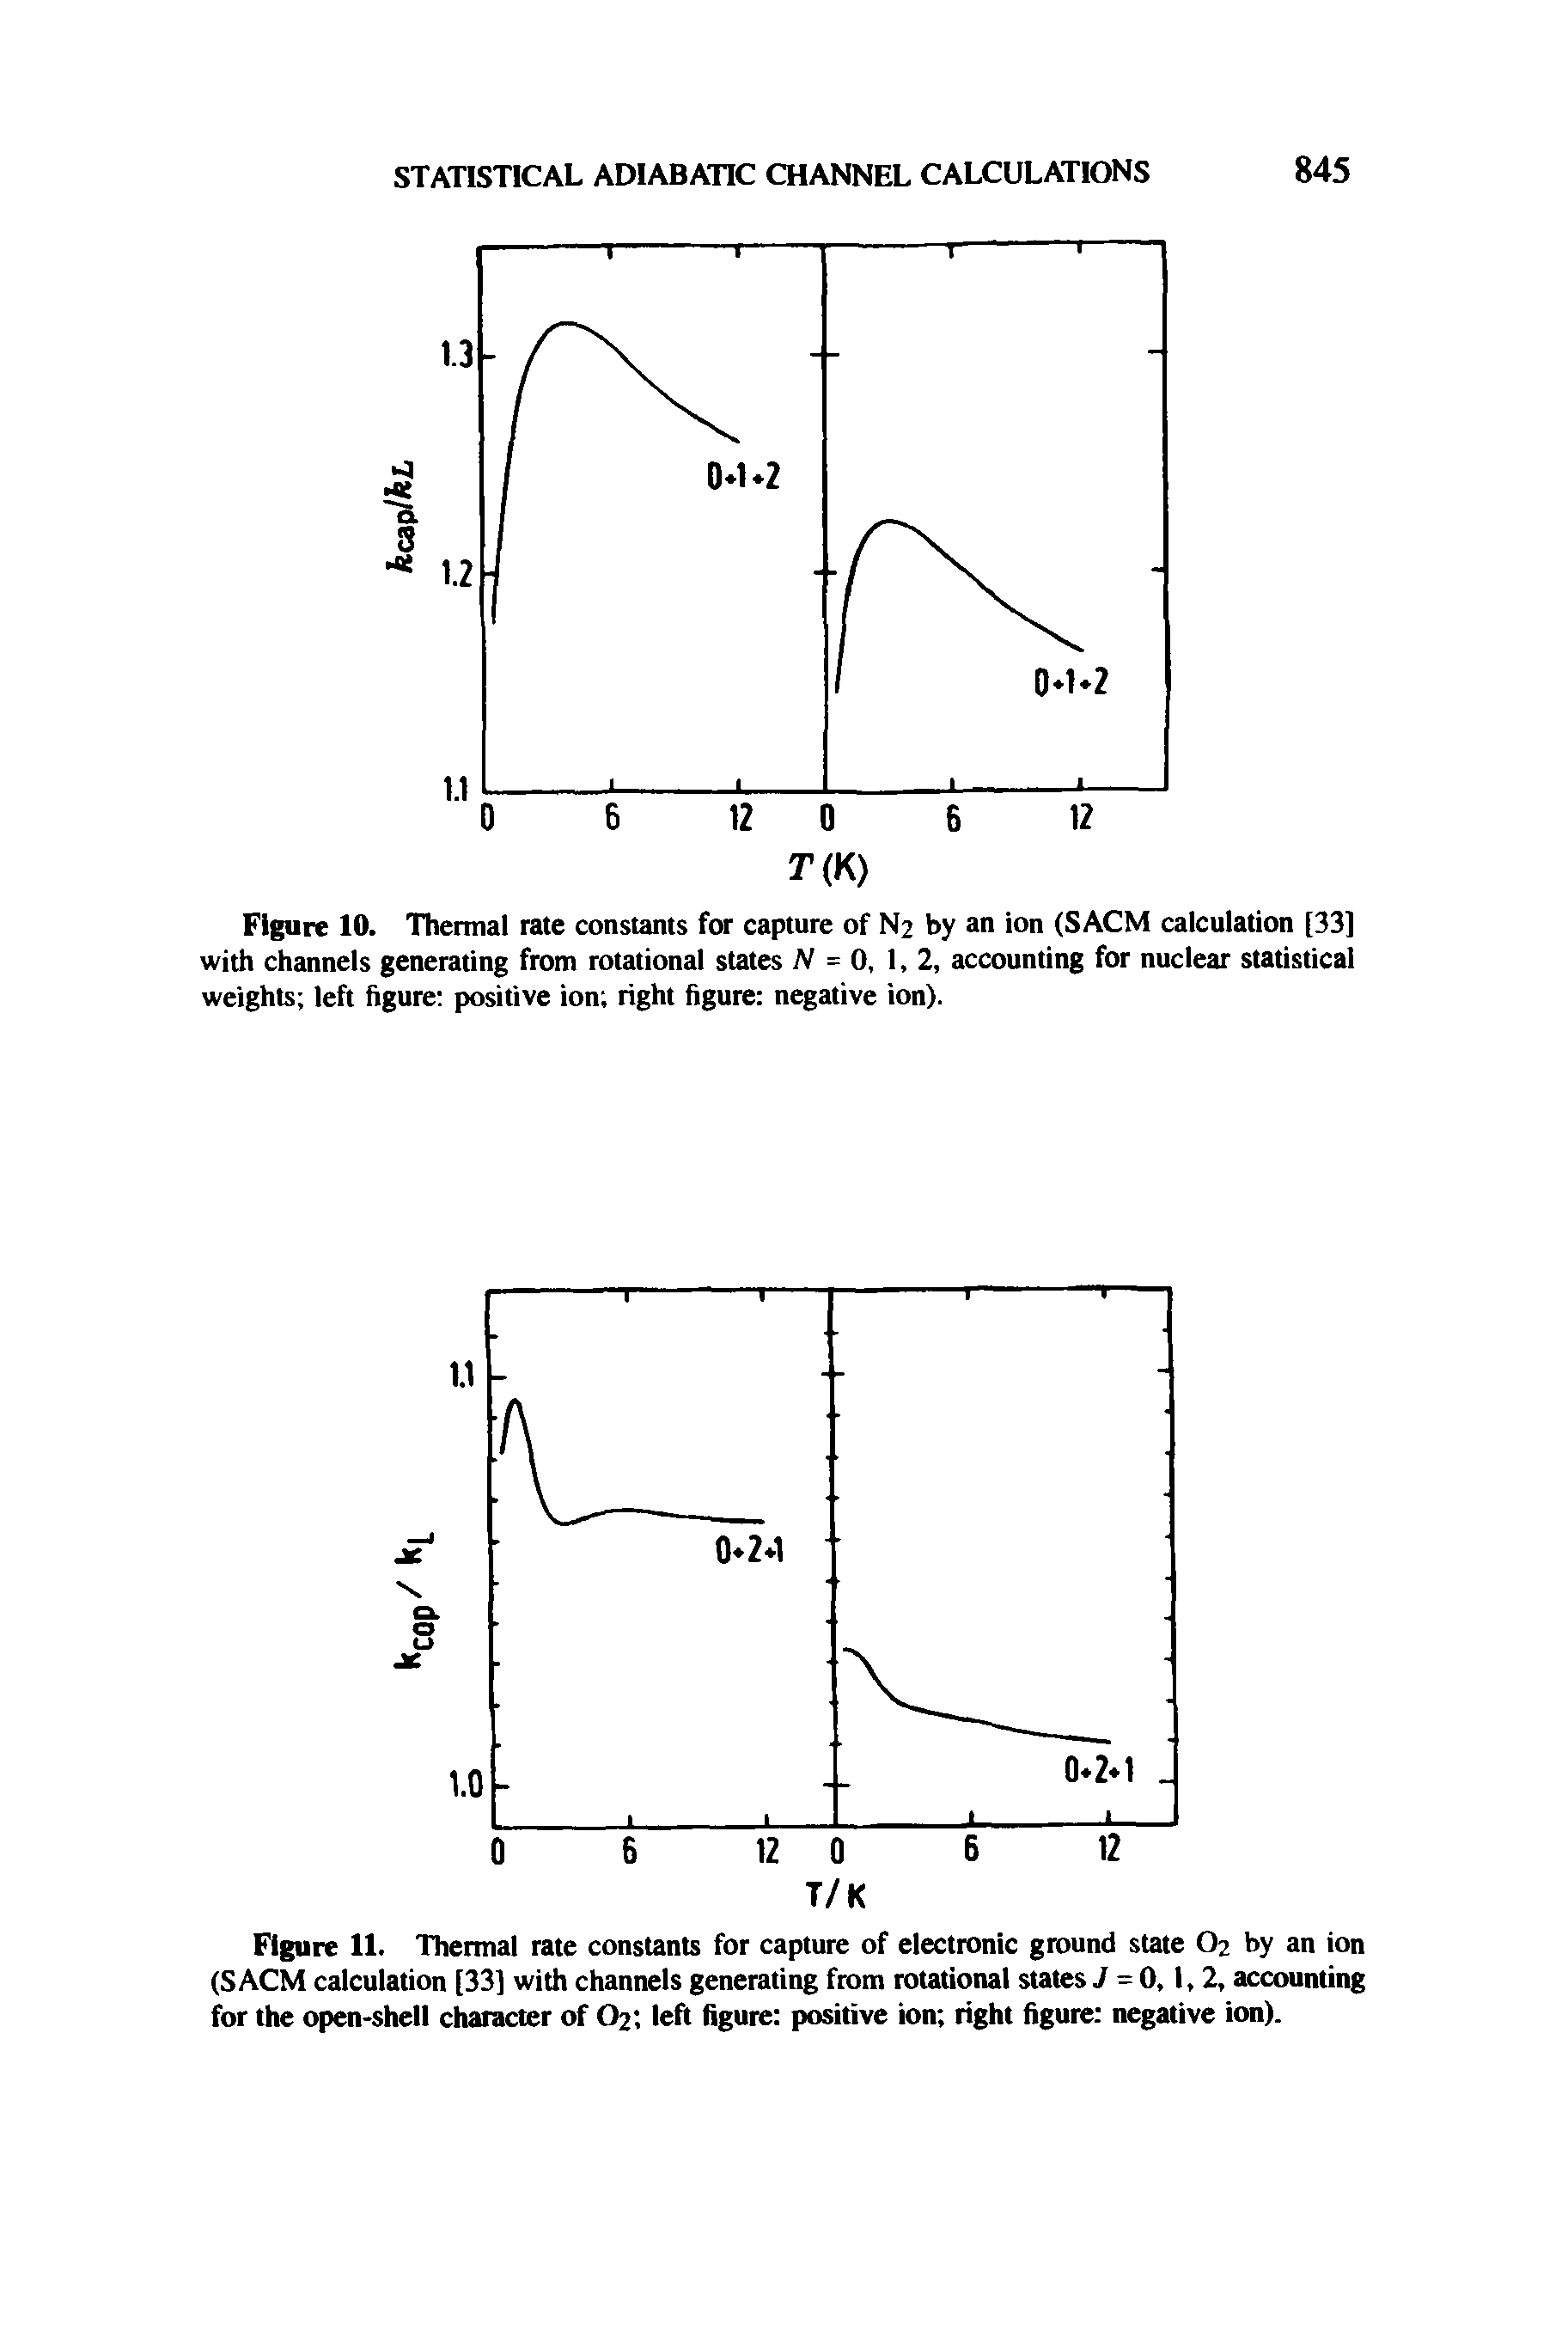 Figure 10. Thermal rate constants for capture of N2 by an ion (SACM calculation [33] with channels generating from rotational states N = 0, 1,2, accounting for nuclear statistical weights left figure positive ion right figure negative ion).